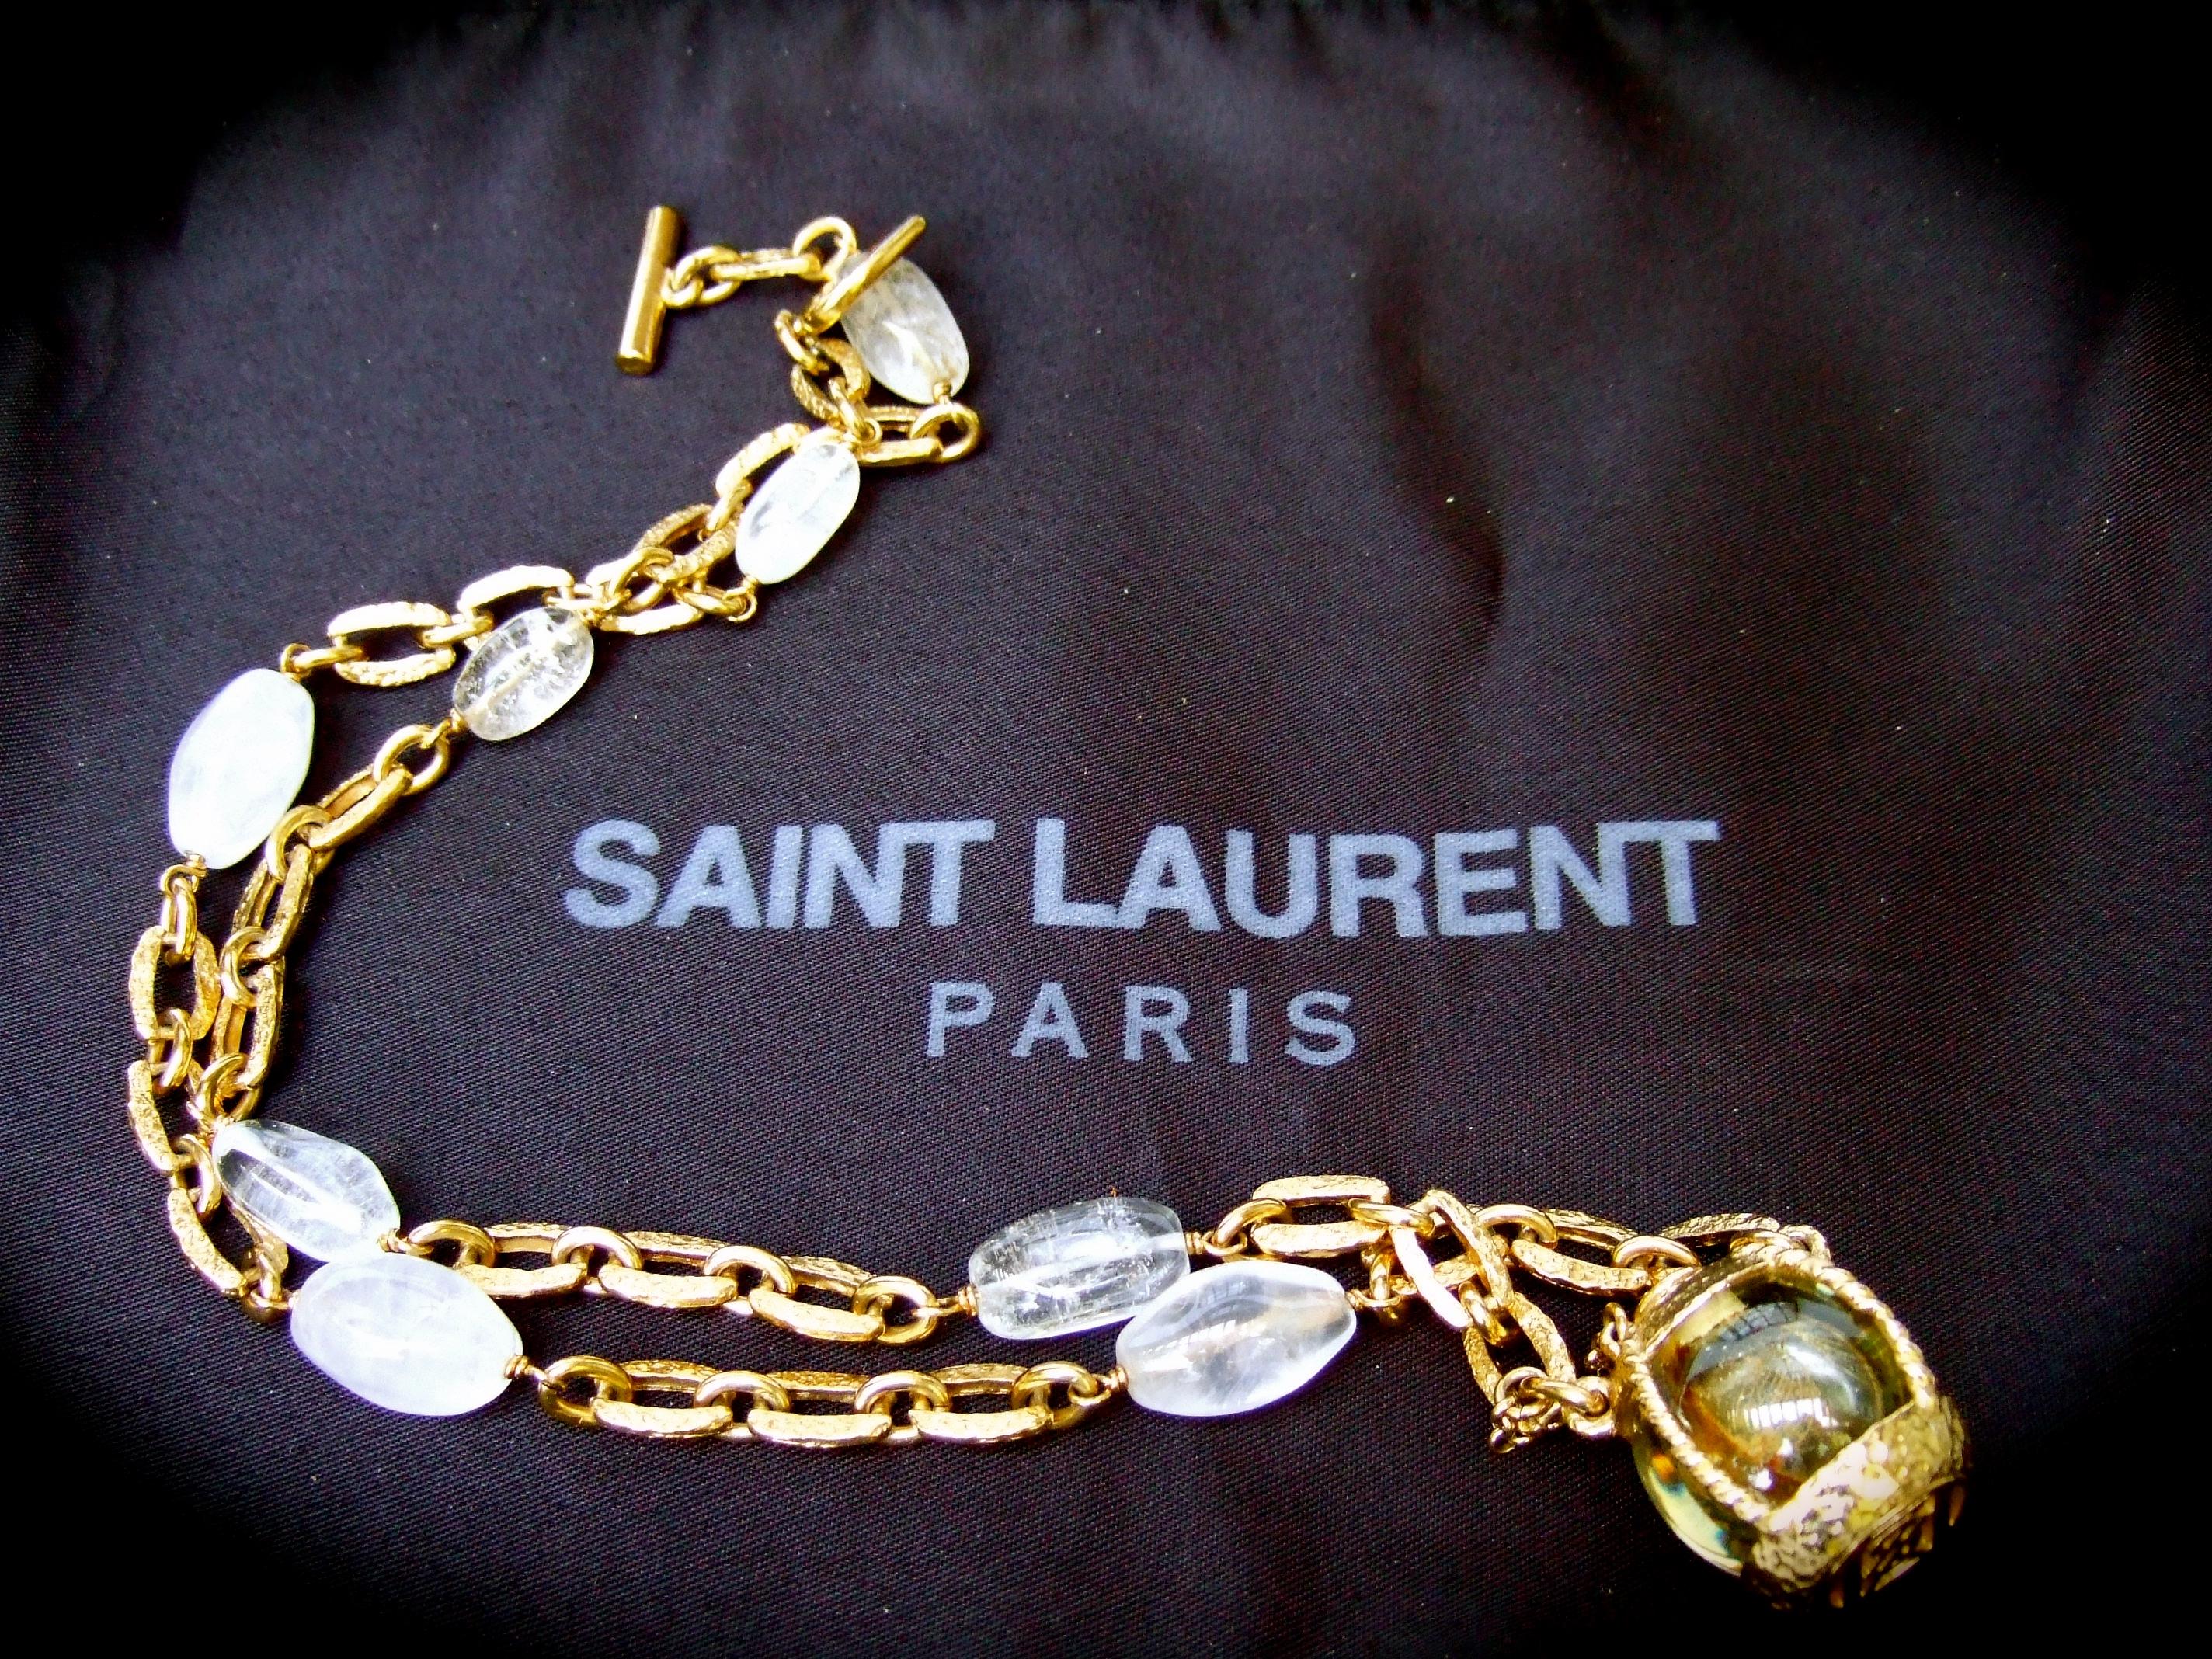 Yves Saint Laurent Rare Crystal Rock Gilt Metal Necklace by Goossens c 1983  In Good Condition For Sale In University City, MO